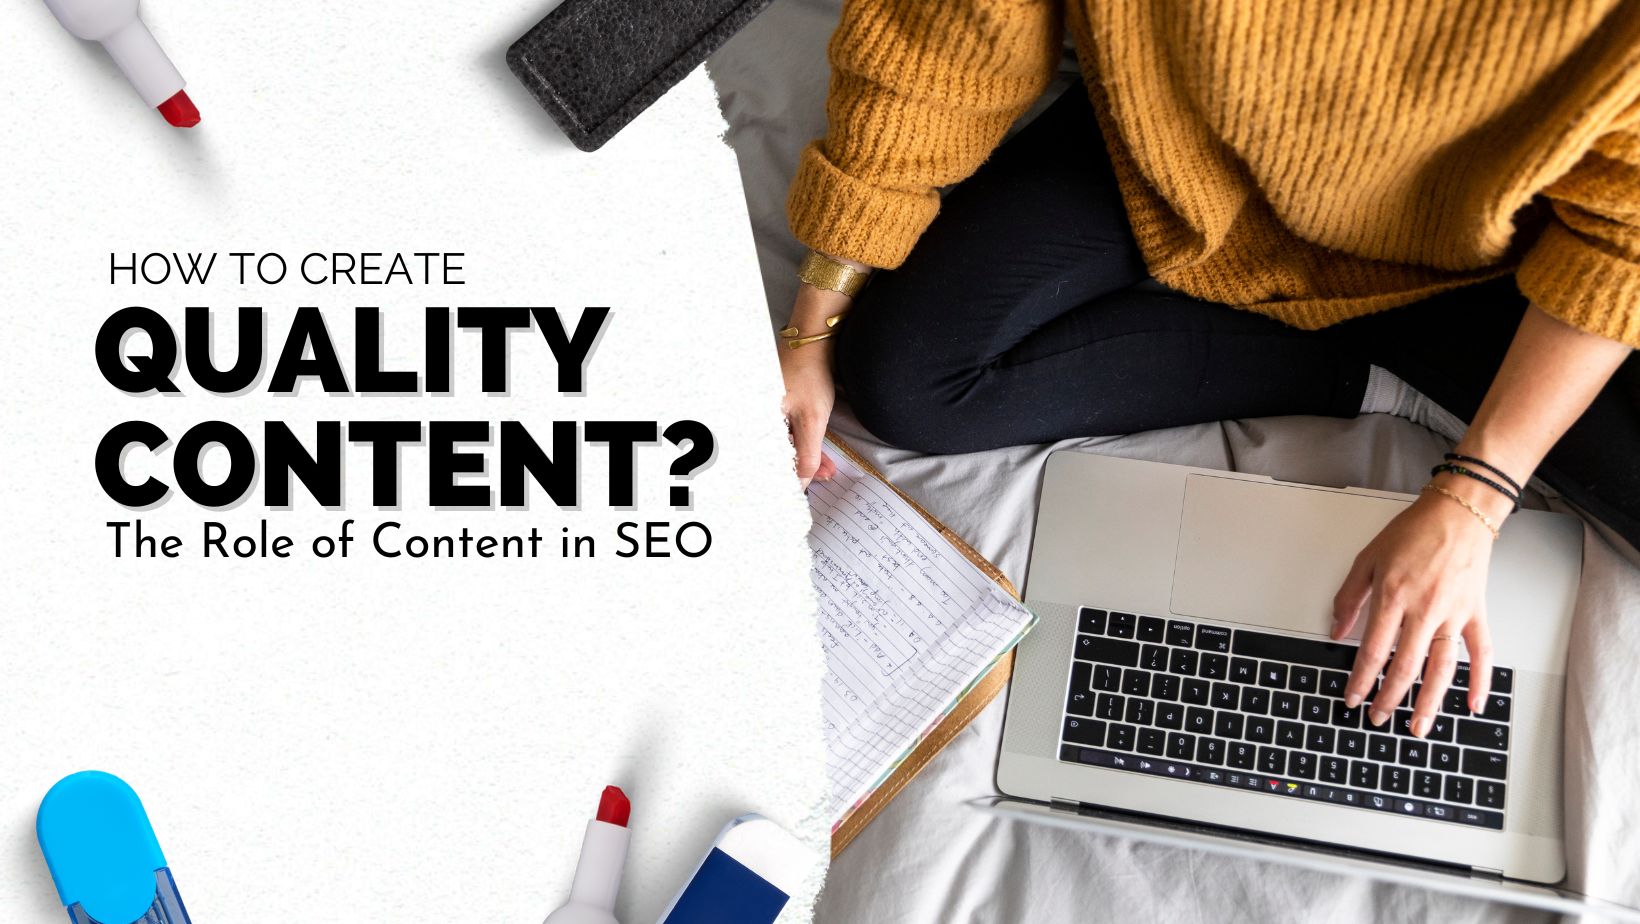 The Role of Content in SEO: How to Create Quality Content?